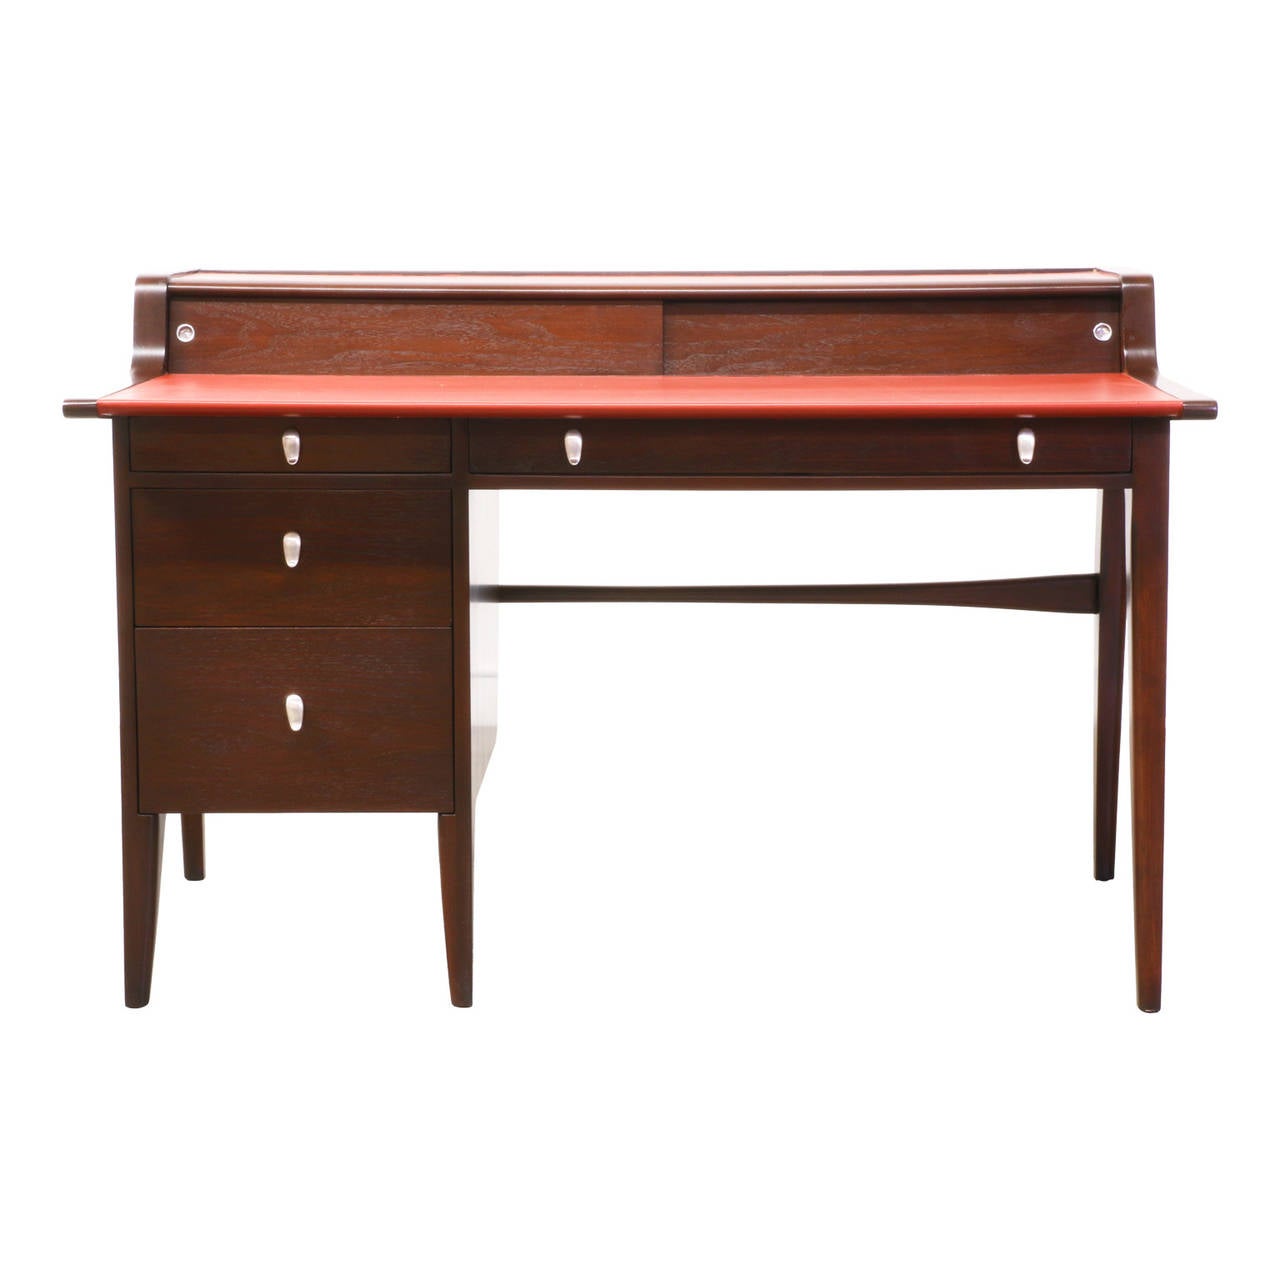 Designer: John Van Koert
Manufacturer: Drexel “Profile”
Period/Style: Mid Century Modern
Country: United States
Date: 1950’s

Dimensions: 35.25″H x 53.75″W x 32.25″D
Materials: Walnut, Leather
Condition: Excellent – Newly Refinished
Number